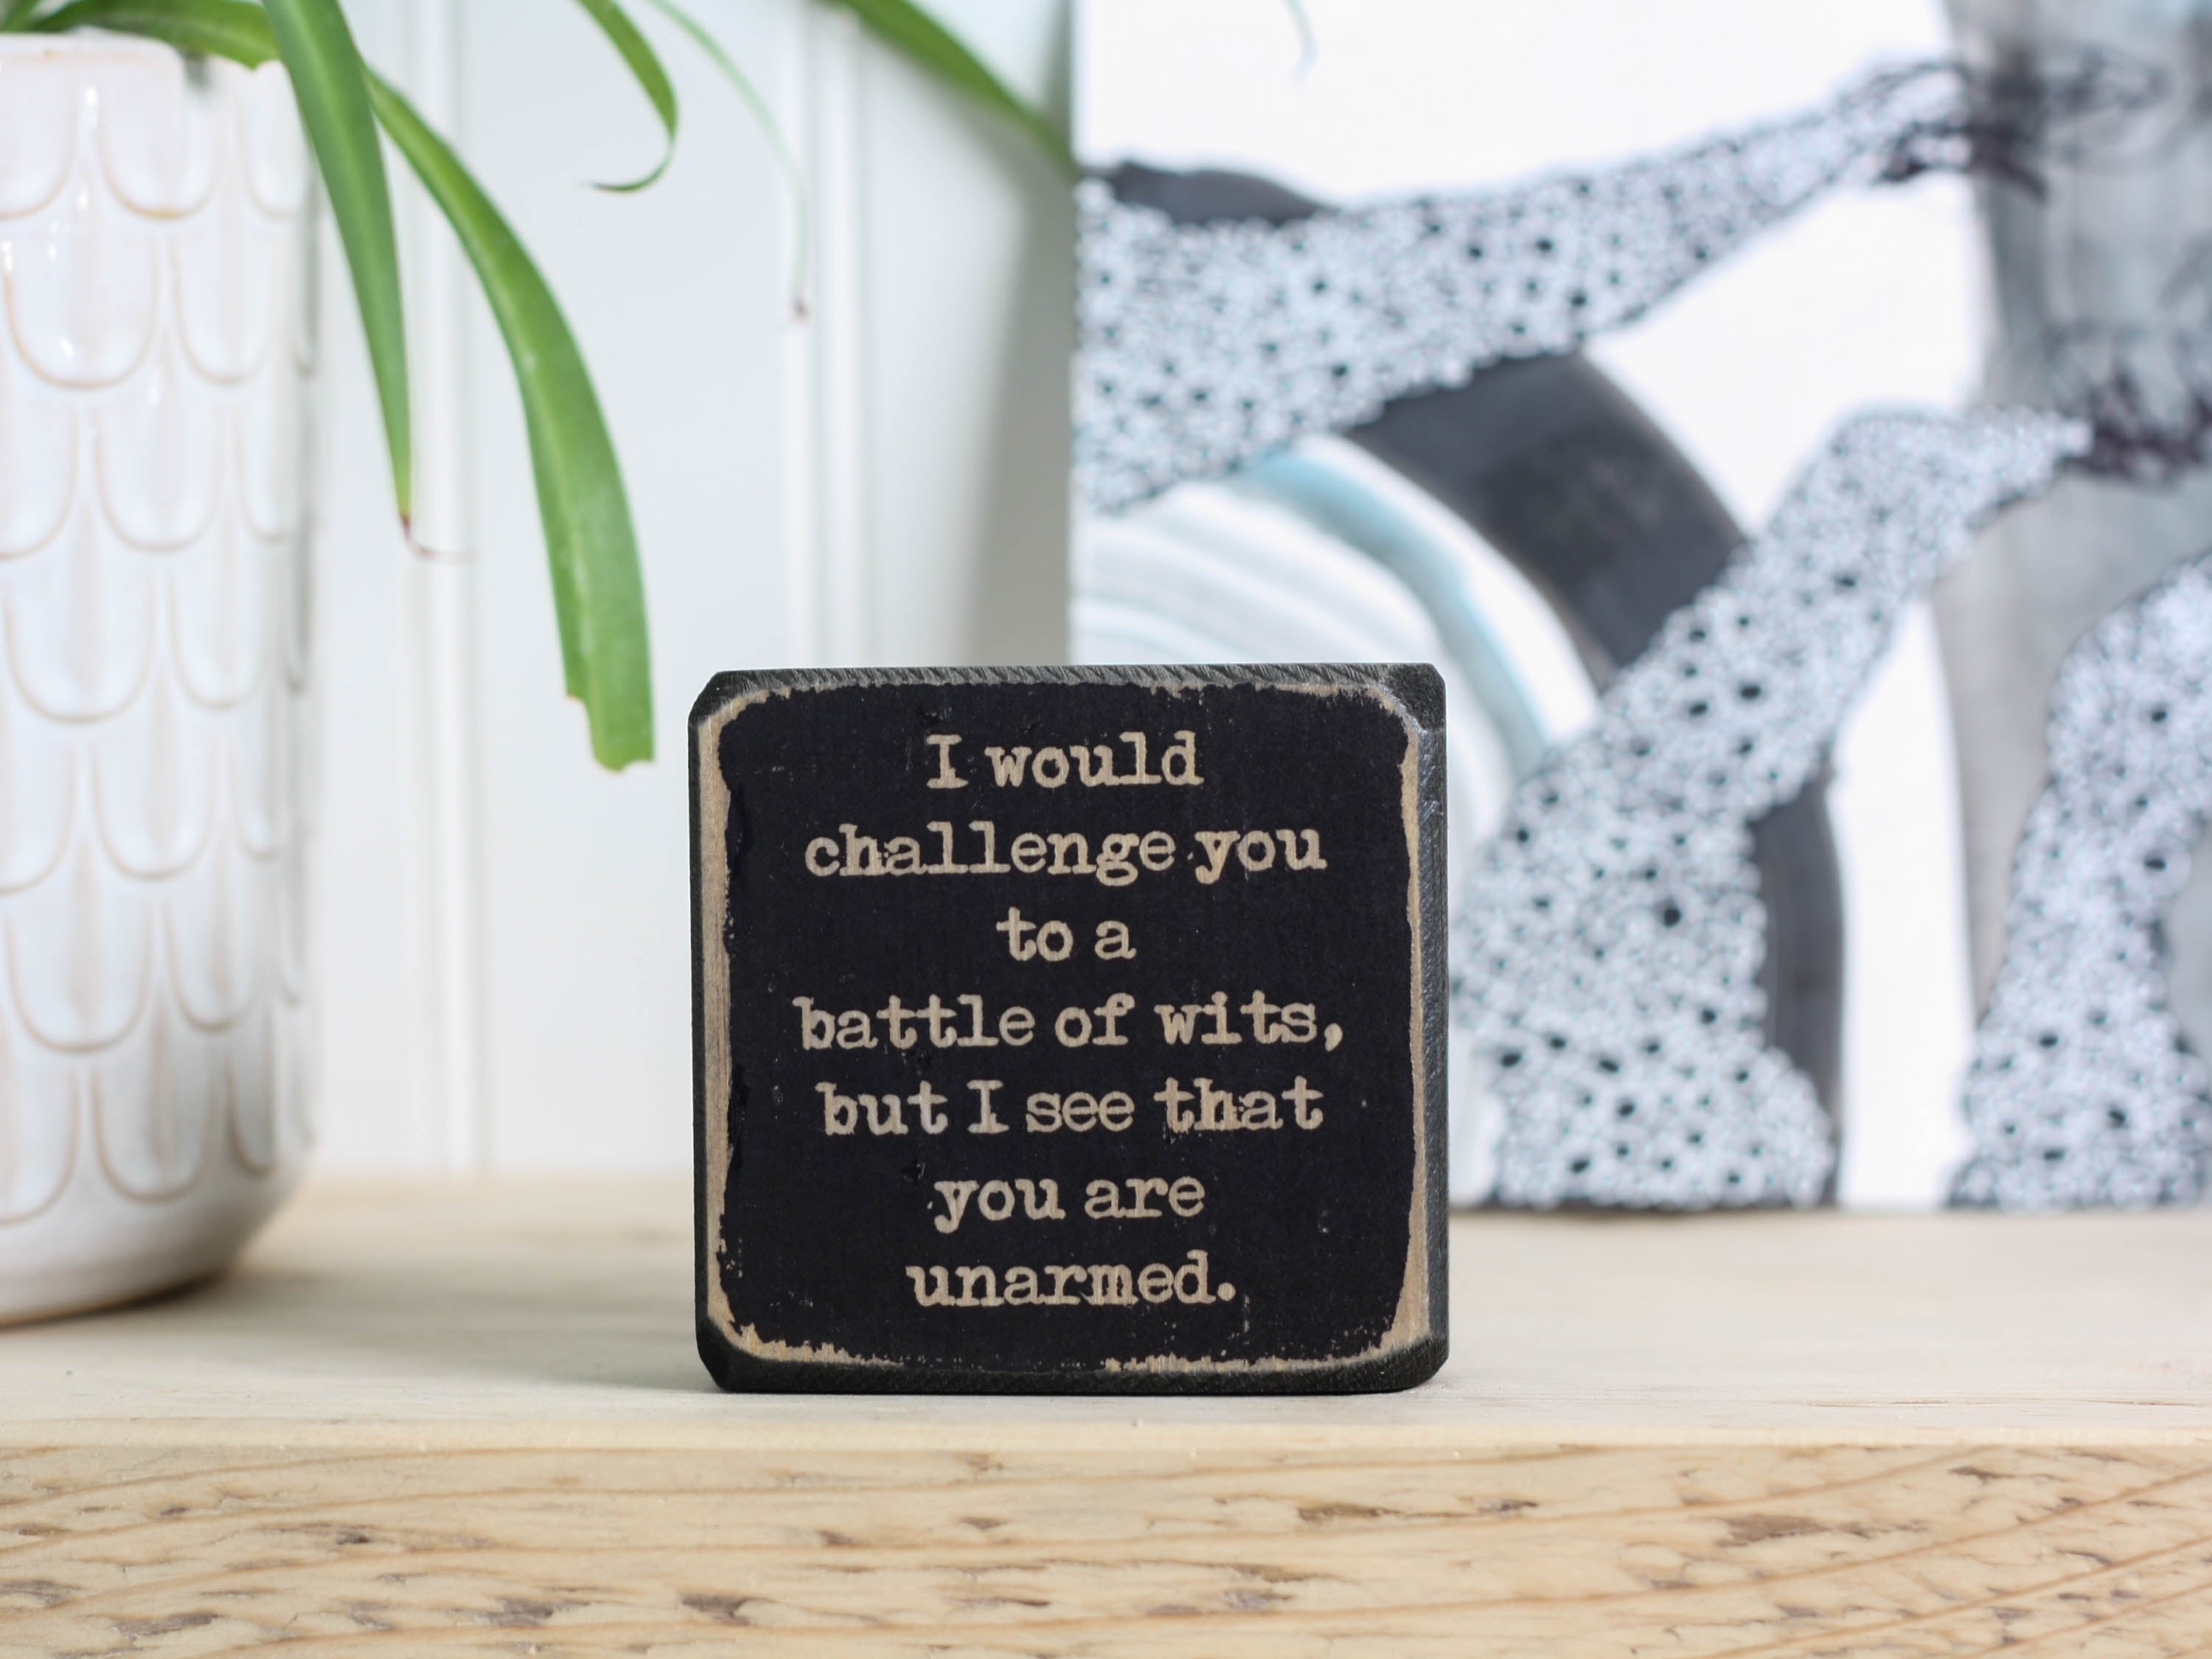 Small wood shelf decor in distressed black with the saying "I would challenge you to a battle of wits, but I see that you are unarmed."